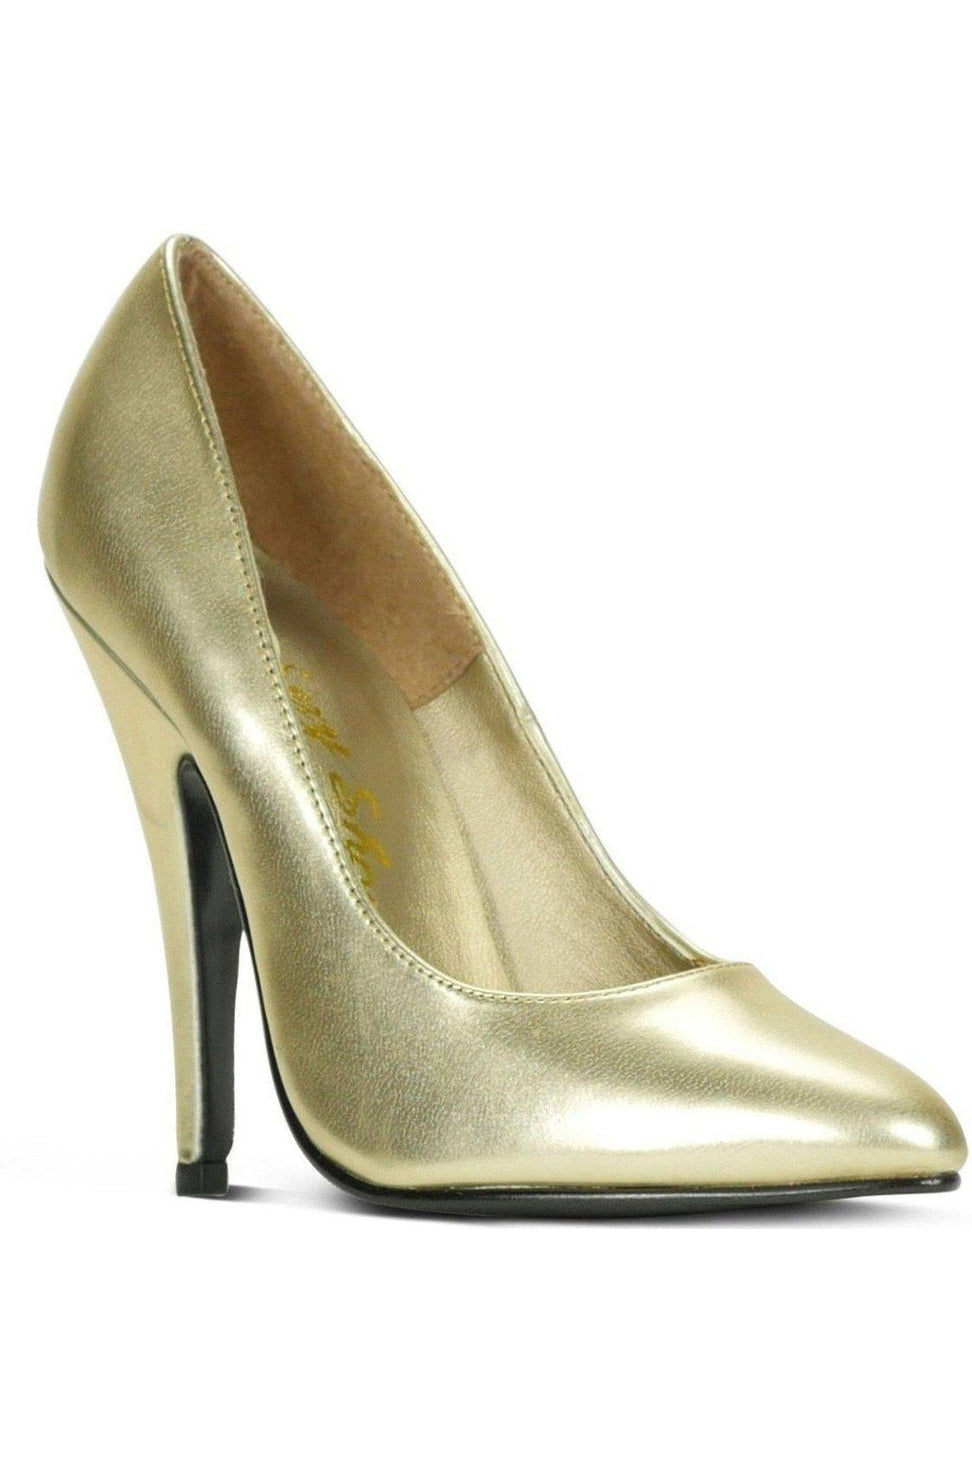 Sexy-4211 Vintage High Heel Pump | Gold Metallic-Sexyshoes Brand-Gold-Pumps-SEXYSHOES.COM